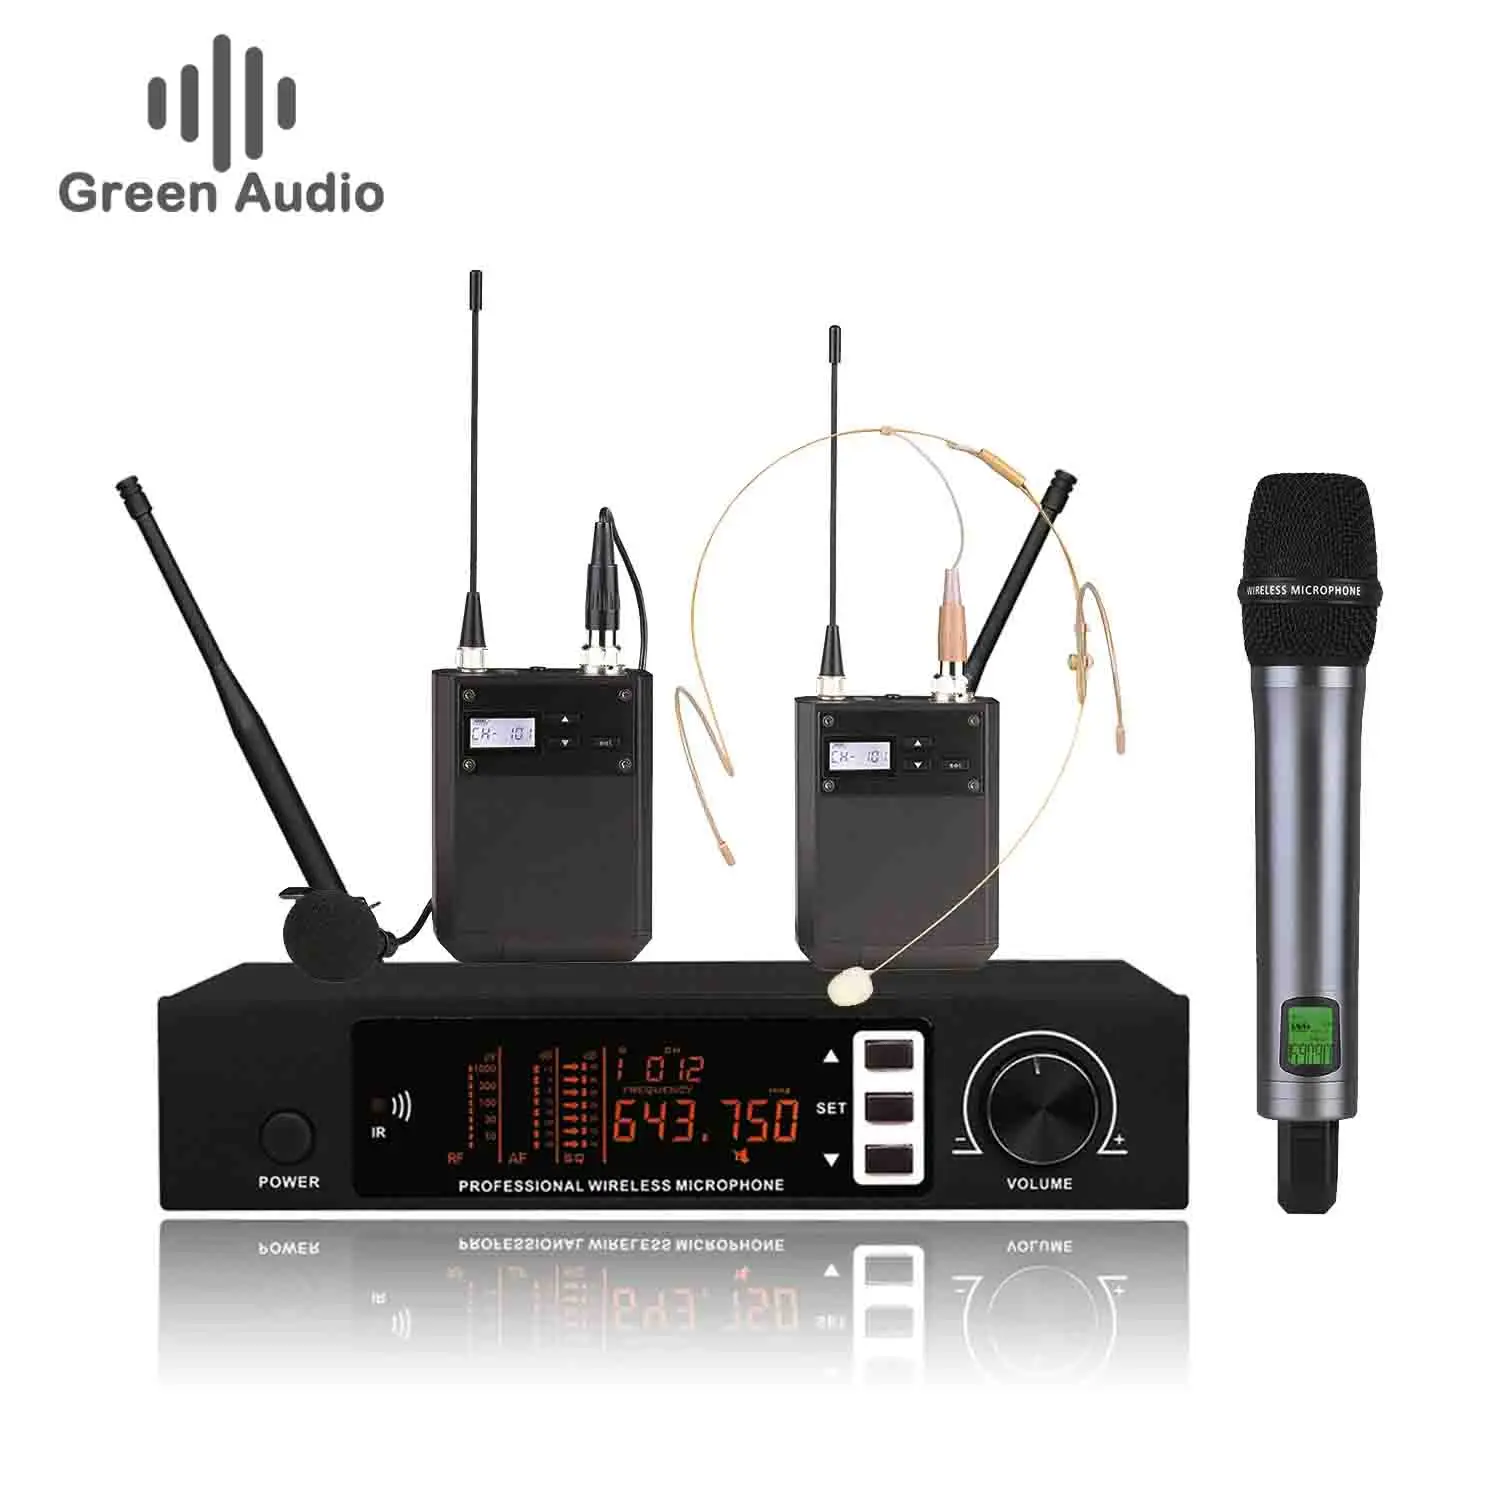 

GAW-S9000 100 UHF frequency points true diversity anti-jamming wireless microphone sets